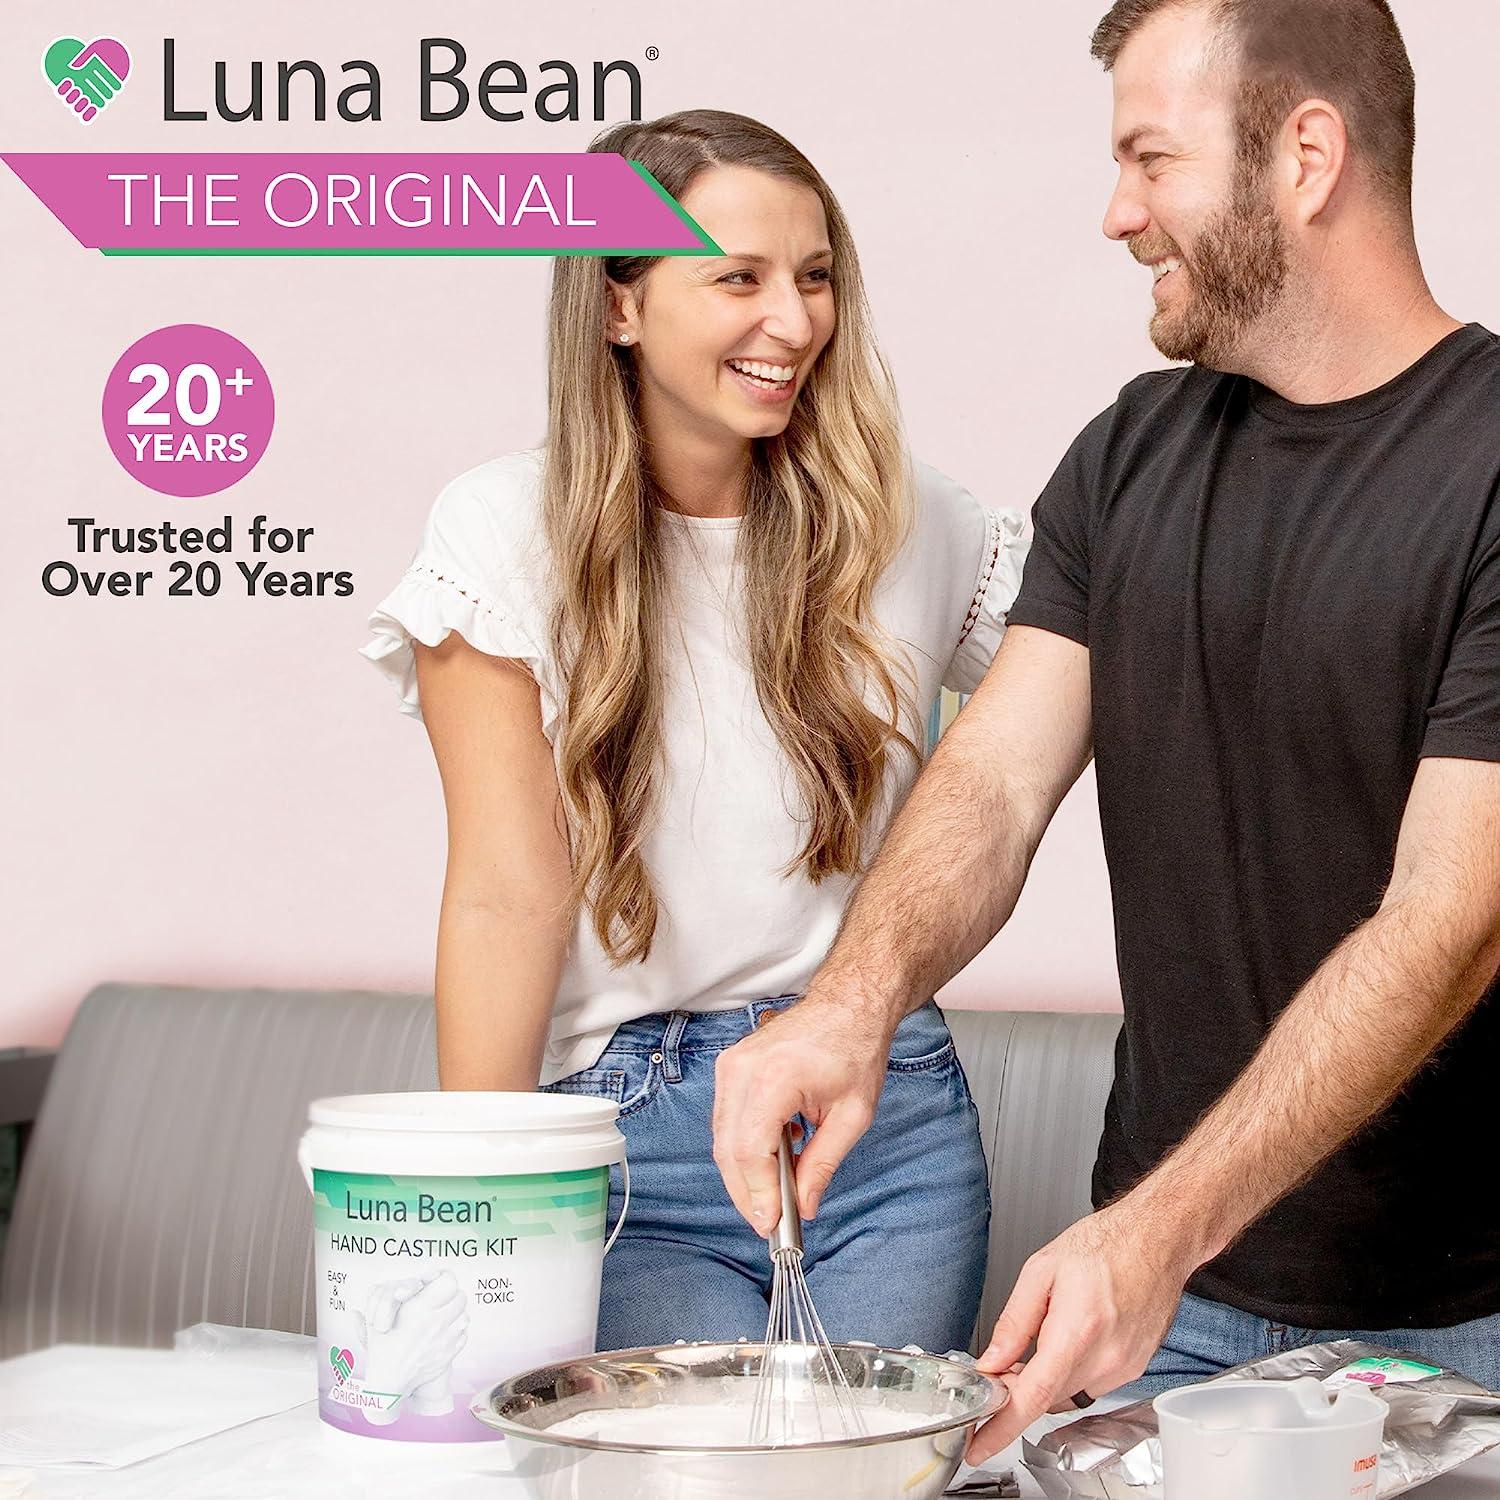 How to Cast Your Hand Sculpture for Couples Using Luna Bean